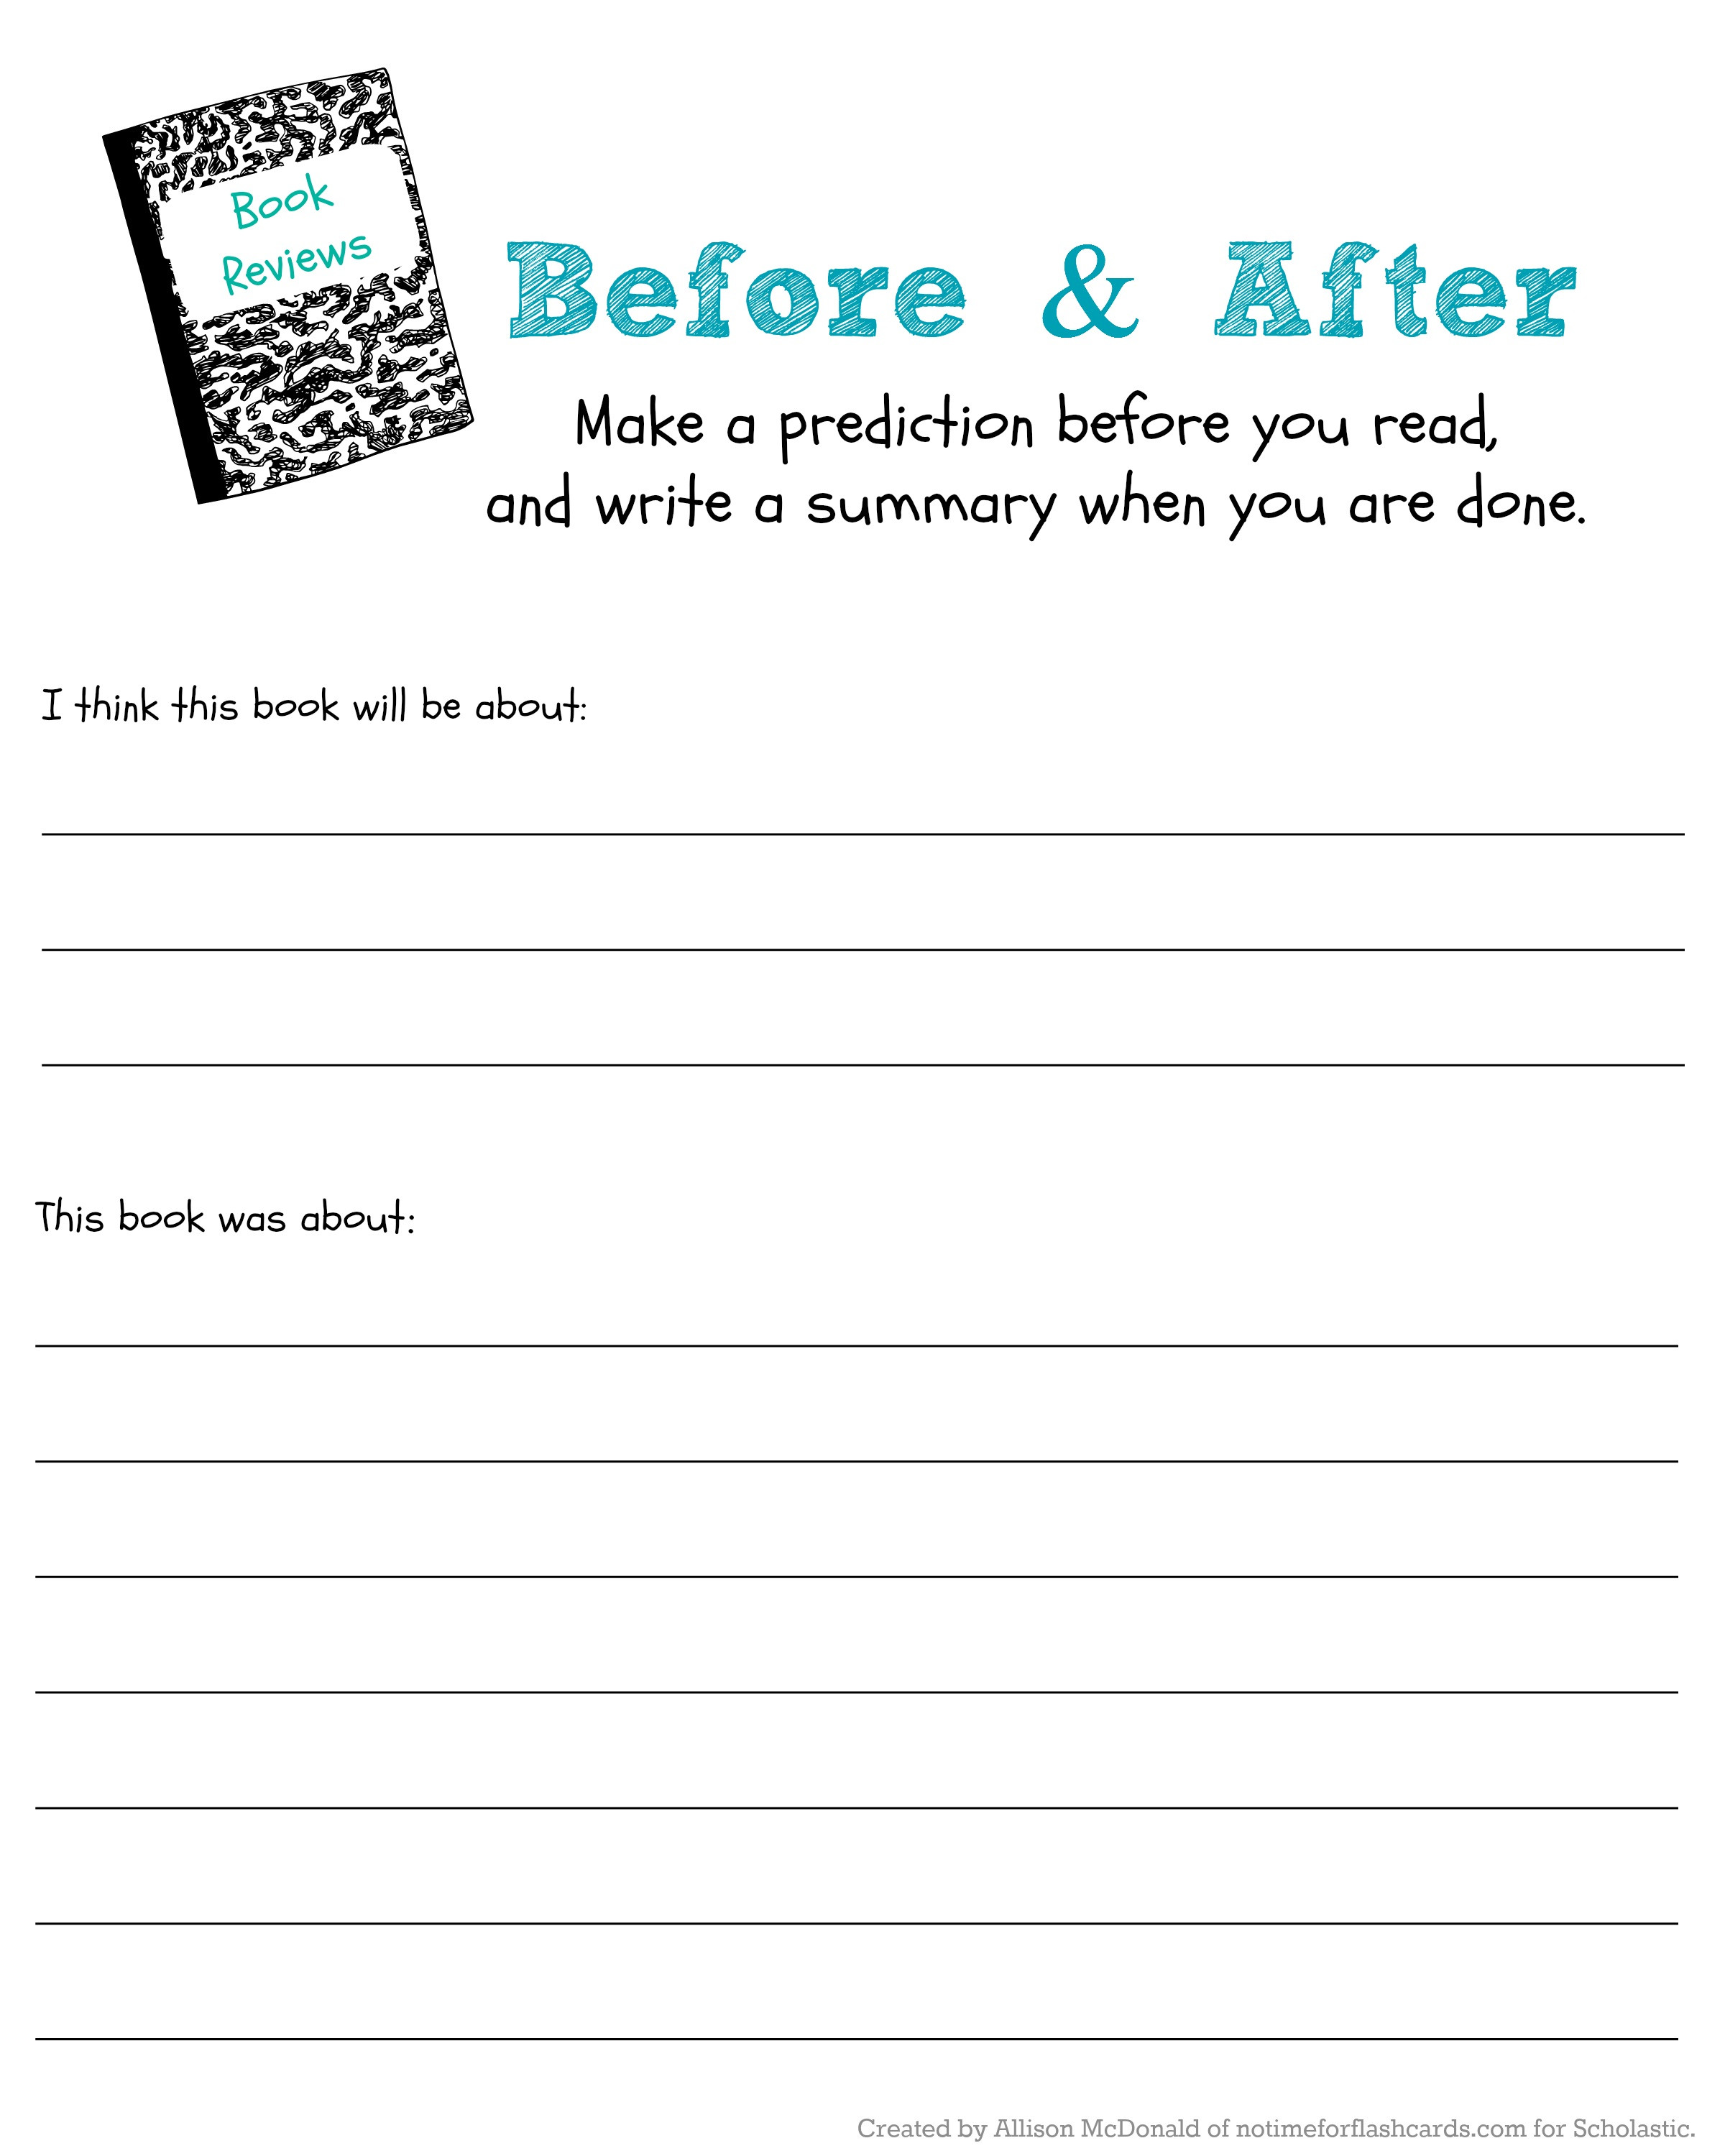 Predictions Worksheets 1st Grade Judge A Book by Its Cover to Predict &amp; Read